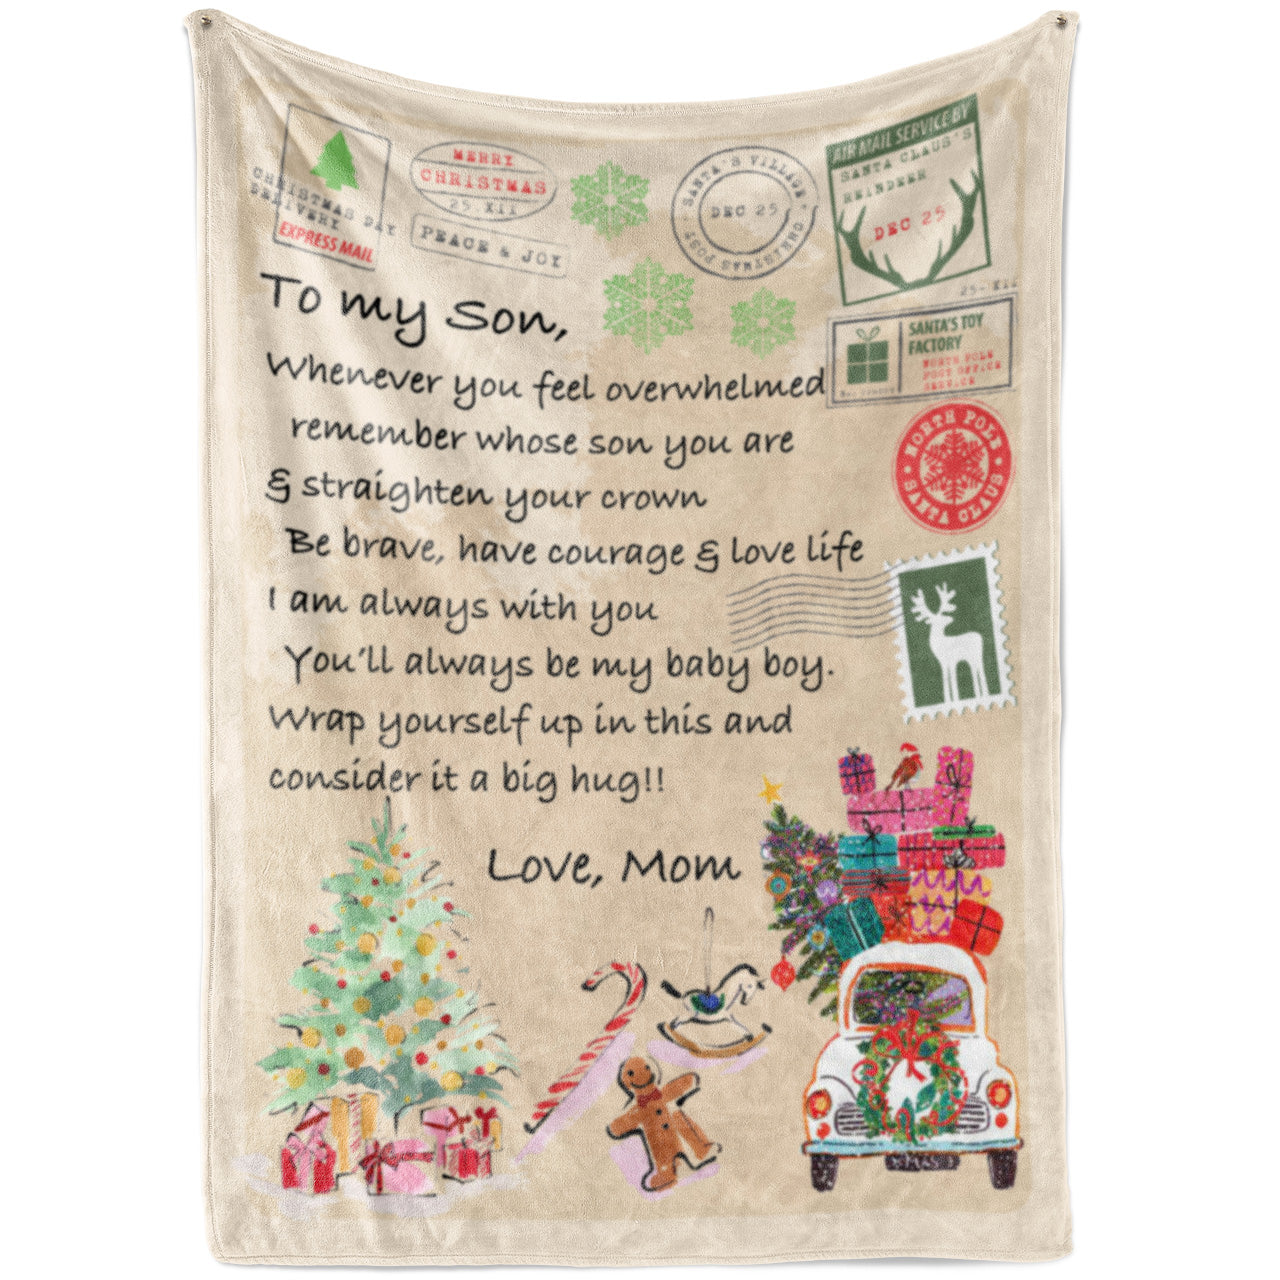 Blanket Christmas Gift ideas For Son, Straighten Your Crown